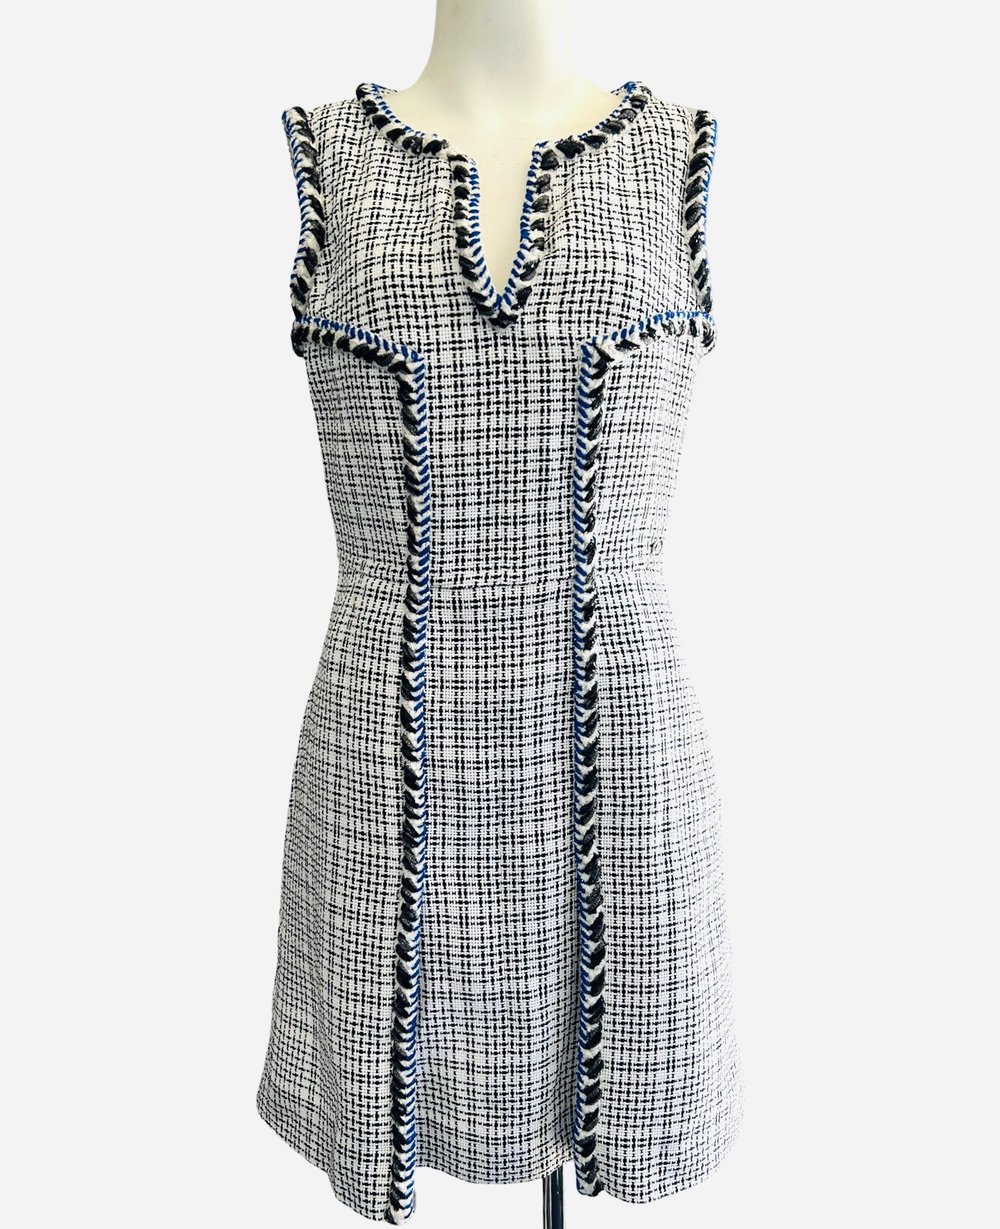 Chanel Black White Blue Tweed Sleeveless Dress with Pockets Size 40  Preowned — Socialite Auctions